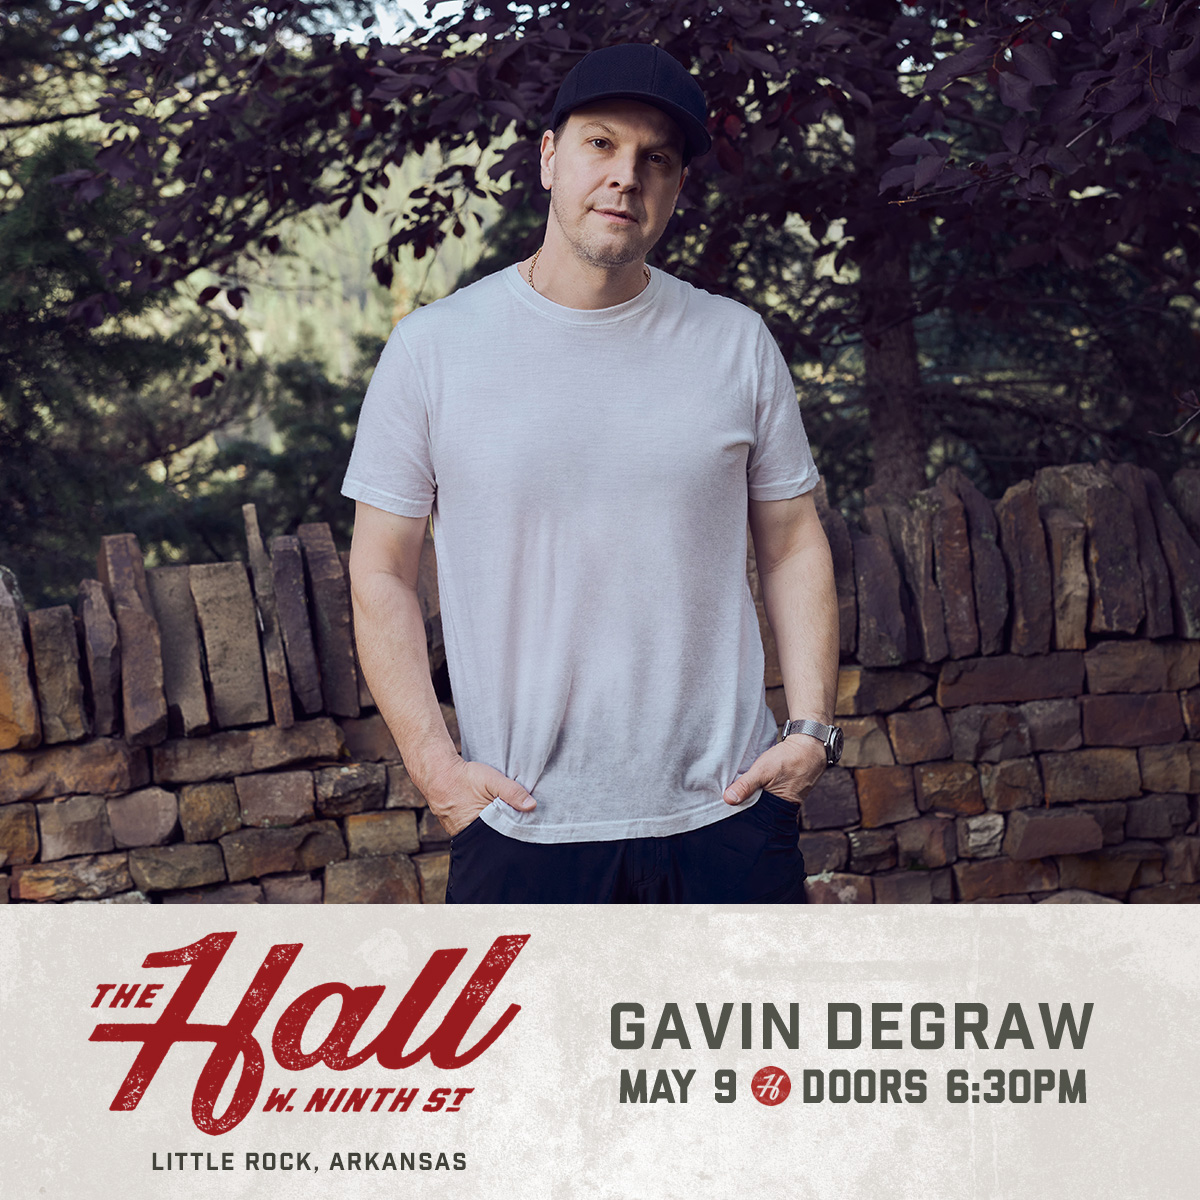 🎤 I don't wanna be anything other than someone who's at the @GavinDeGraw concert. ⁠ ⁠ All I have to do is think of me (at the gig), and I have peace of mind. ⁠ ⁠ Sign up for presale to get early access at the 🔗 bit.ly/3Oodh3z. Tickets go on sale Friday.